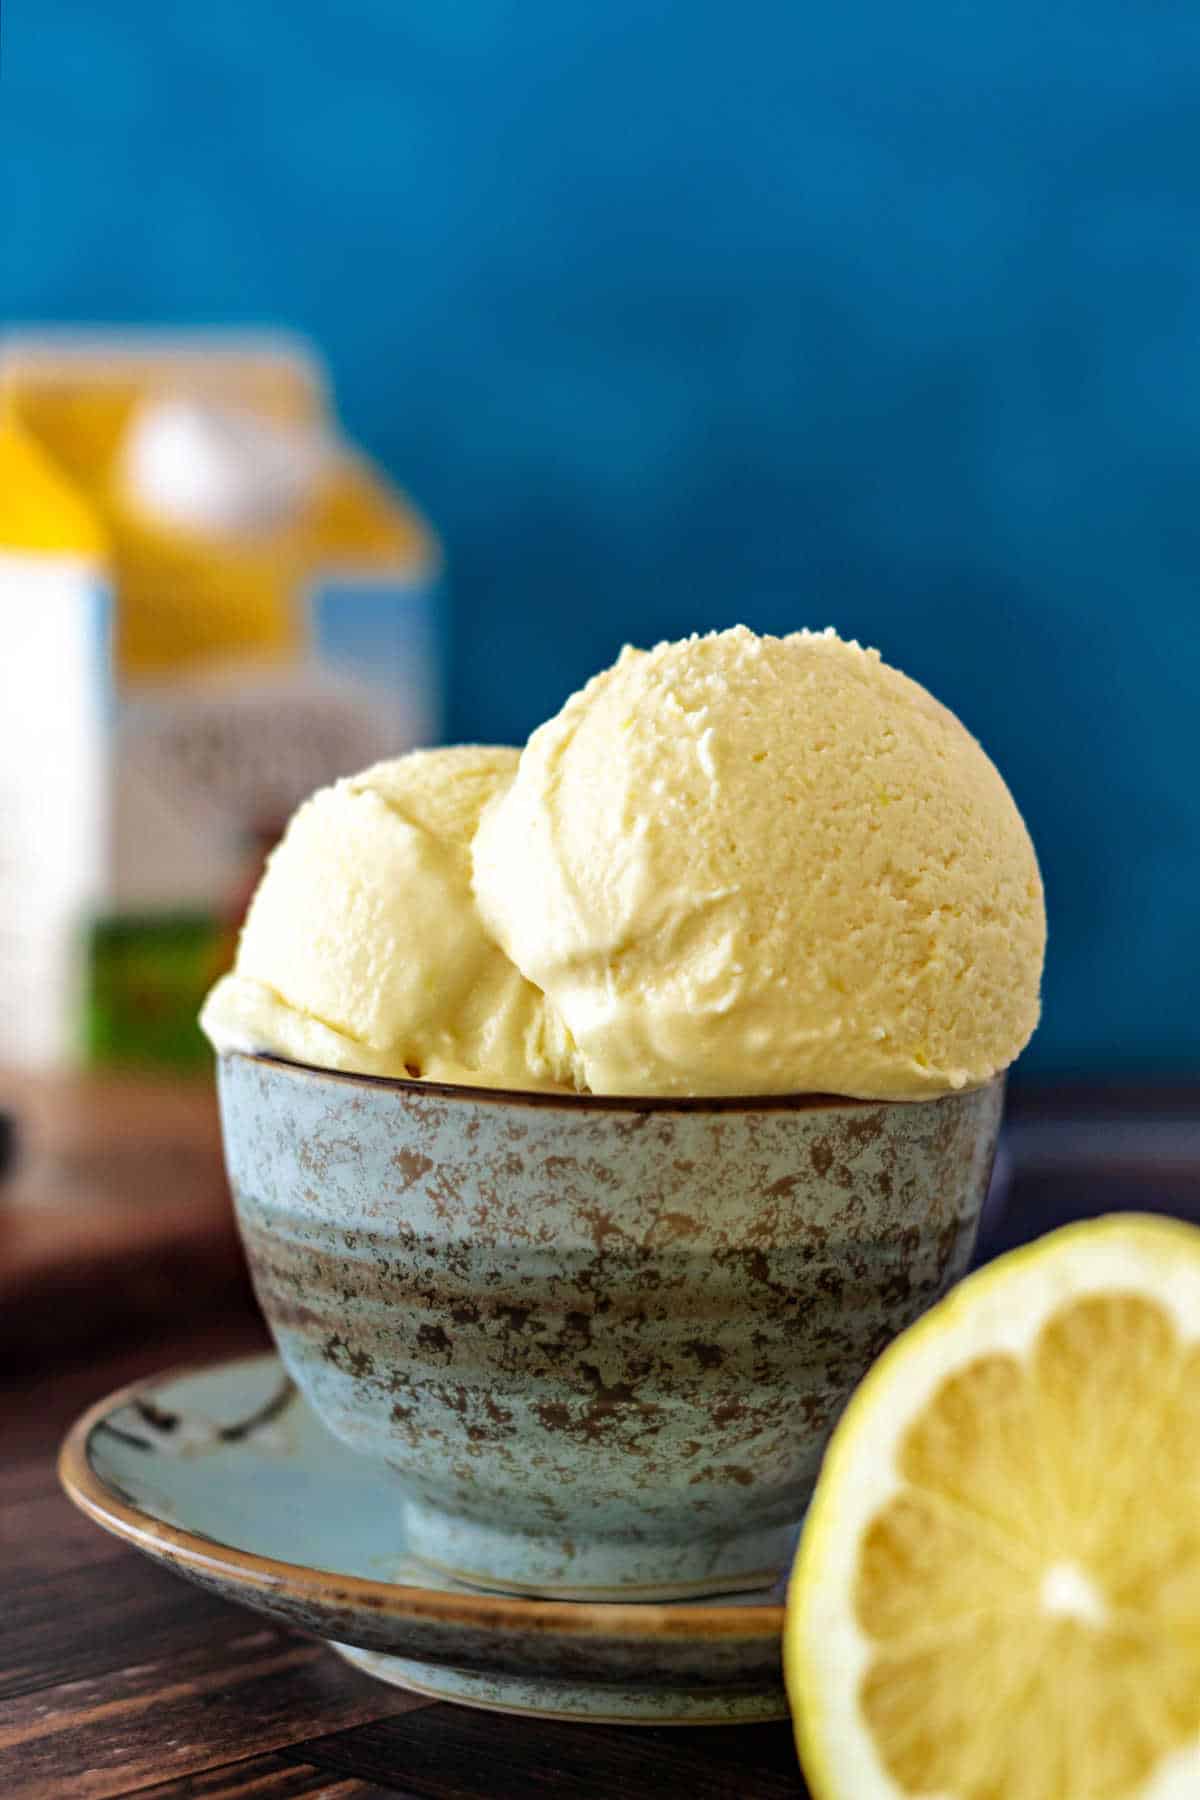 Two scoops of lemon ice cream in a pale blue bowl with a carton of heavy cream in the background and a cut lemon in the foreground.